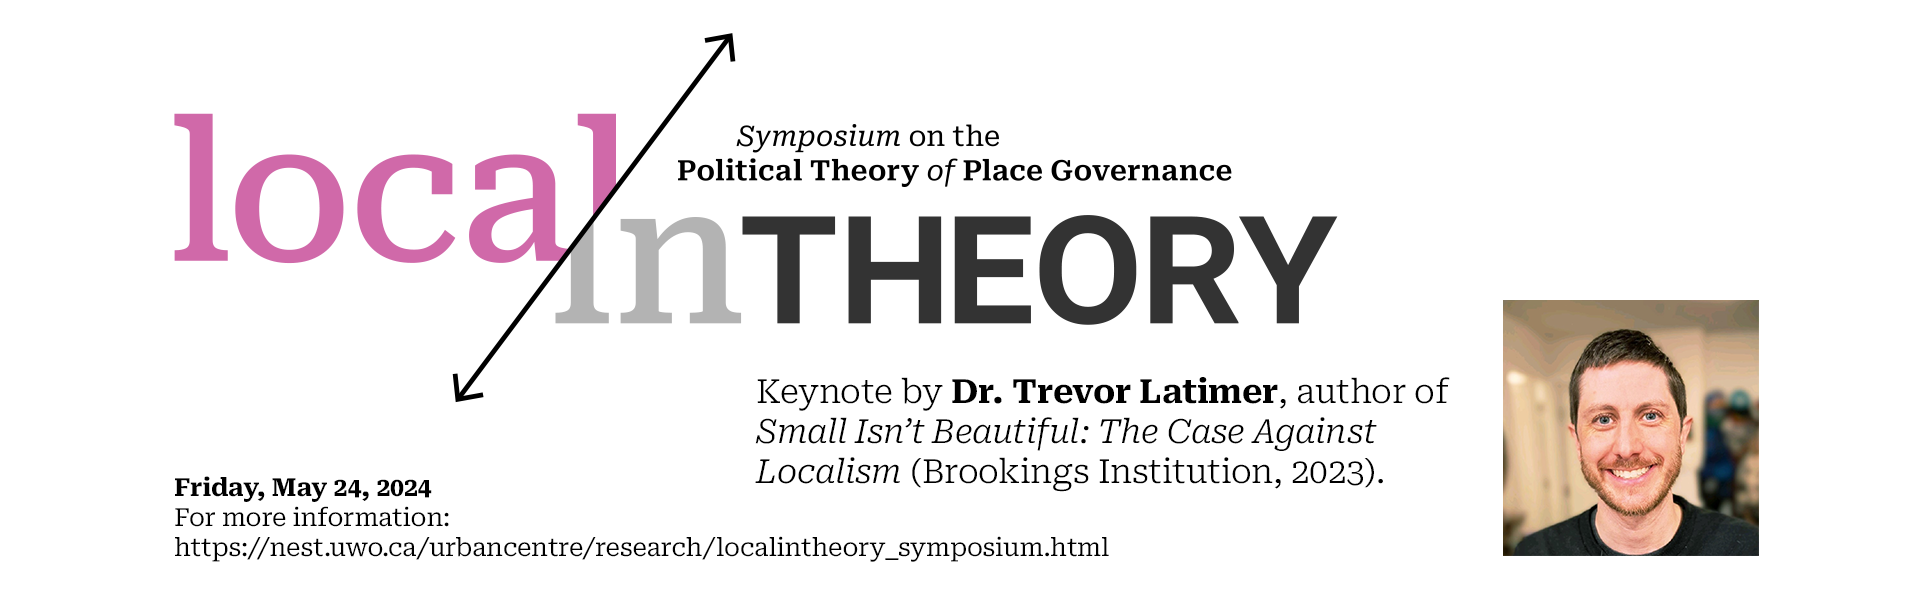 Local/In Theory Symposium on the Political Theory of Place Governance, May 24, 2024